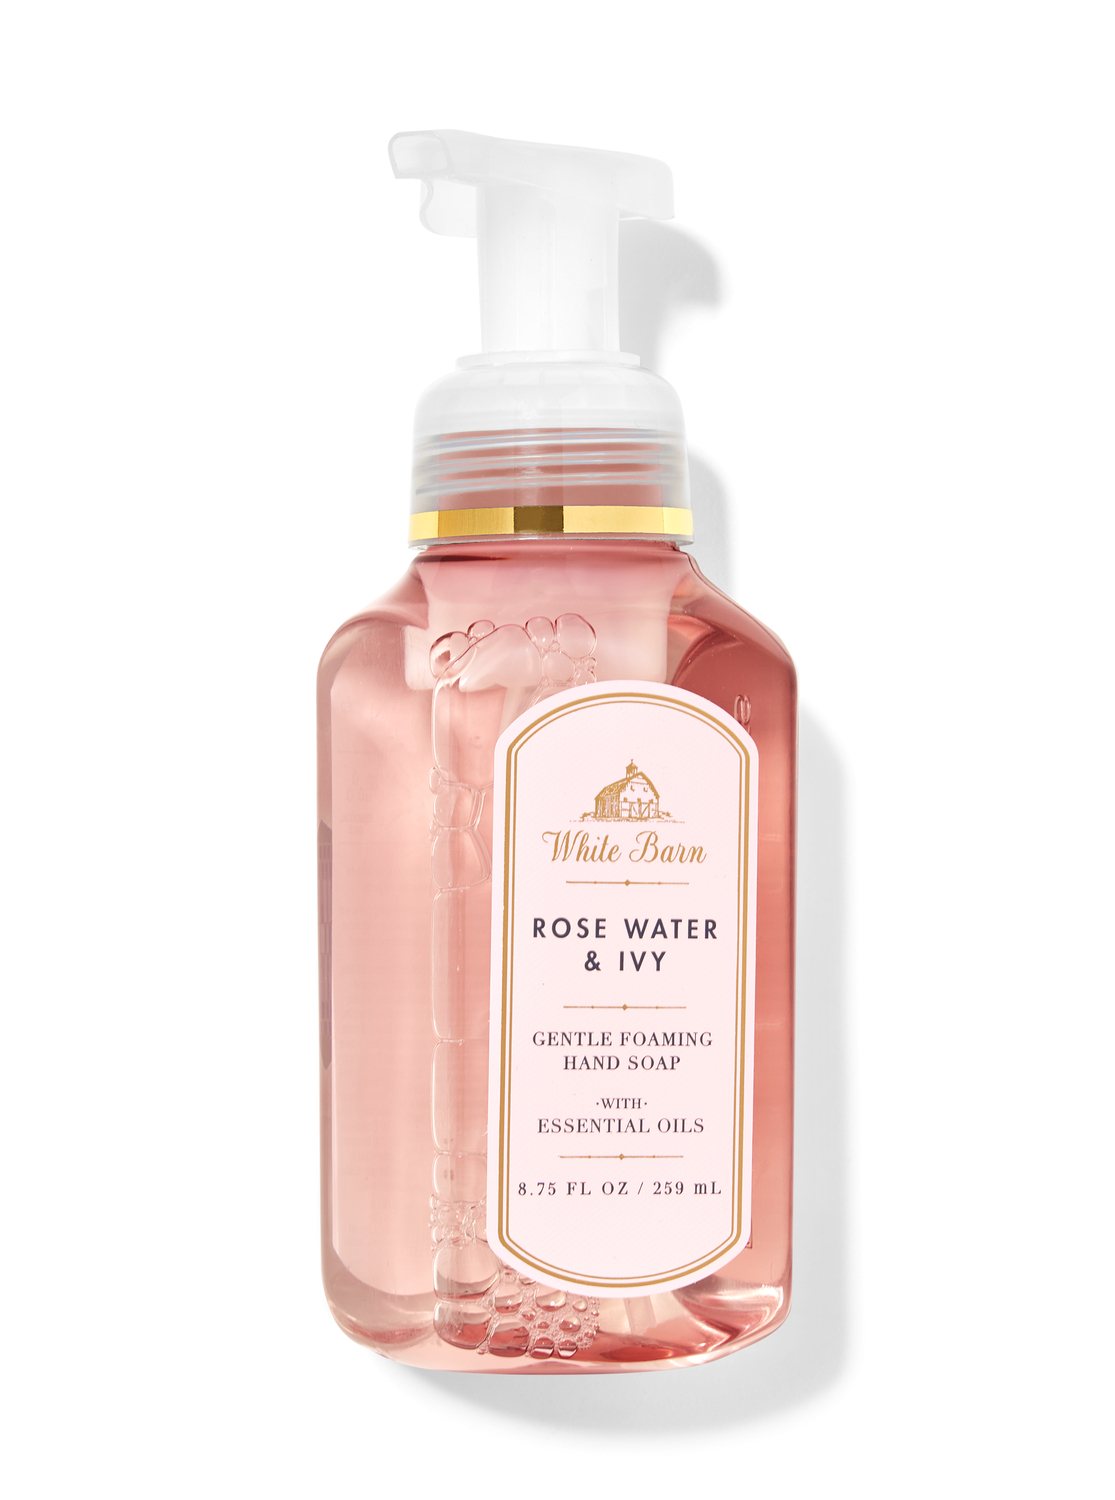 Rose Water & Ivy Foaming Hand Soap Bath & Body Works Malaysia